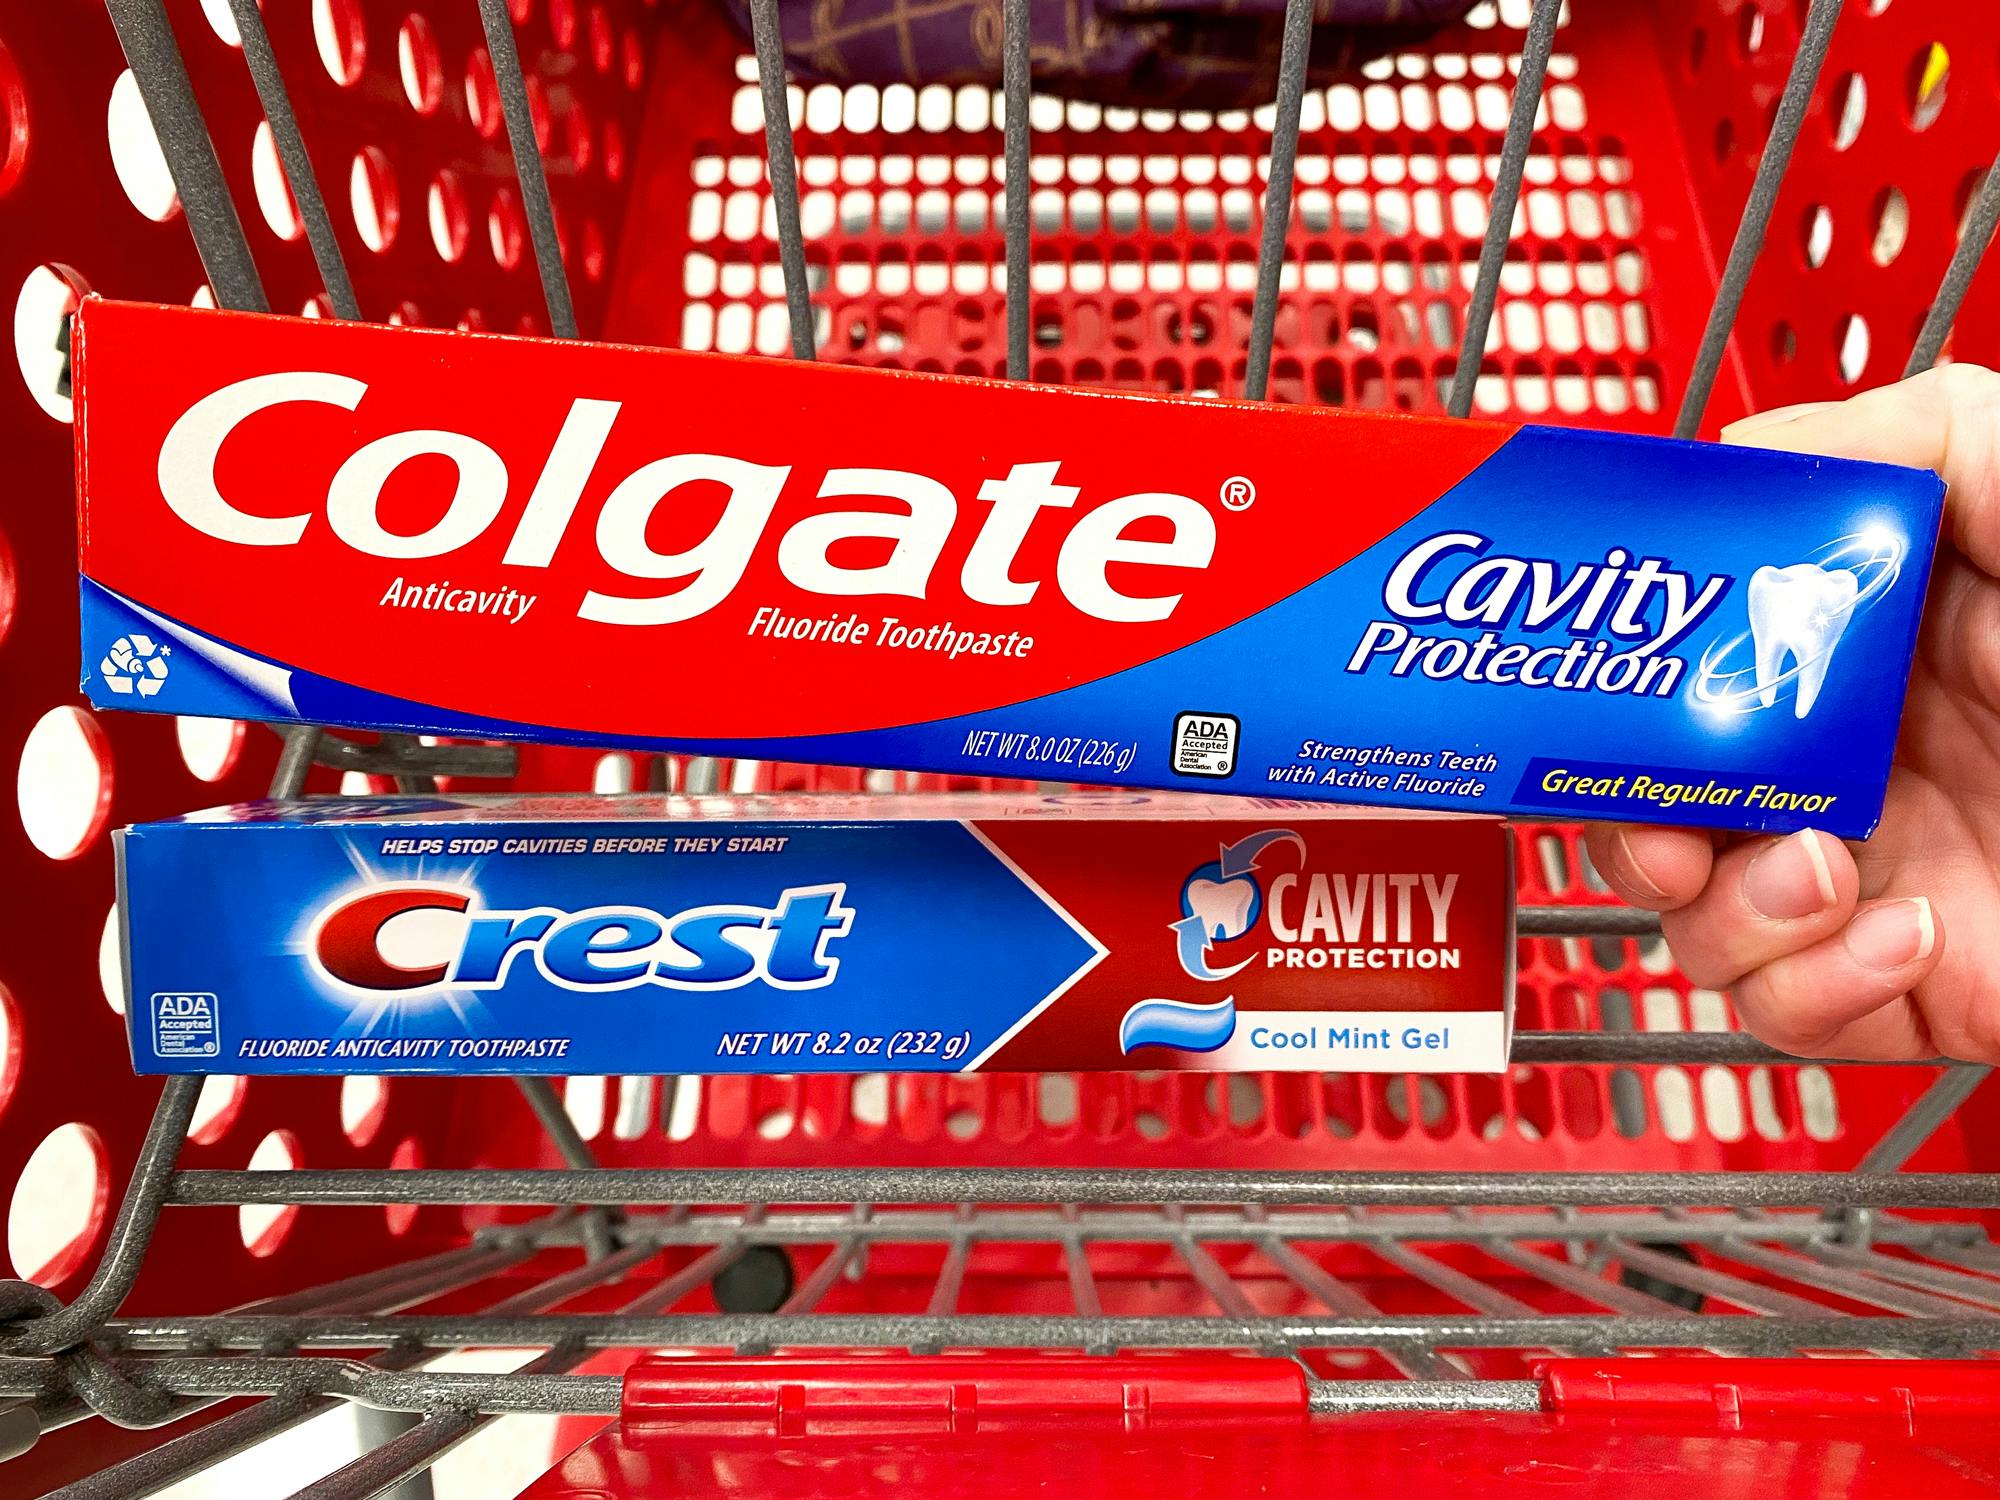 colgate and crest cavity protection toothpaste boxes in target cart